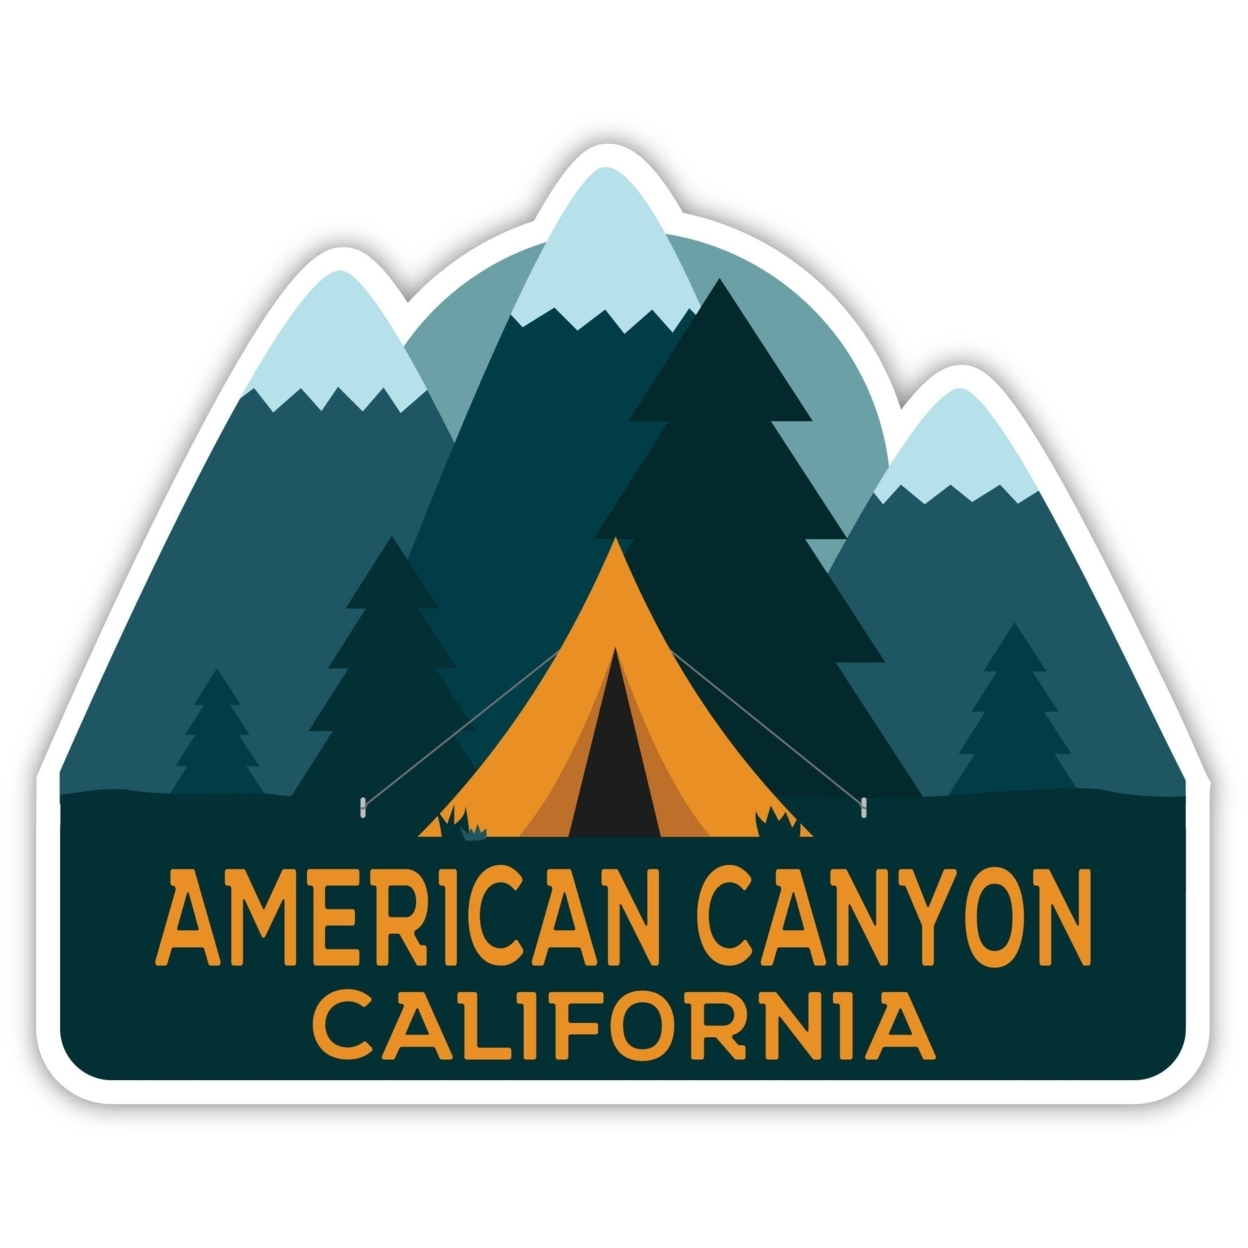 American Canyon California Souvenir Decorative Stickers (Choose Theme And Size) - 4-Pack, 8-Inch, Tent